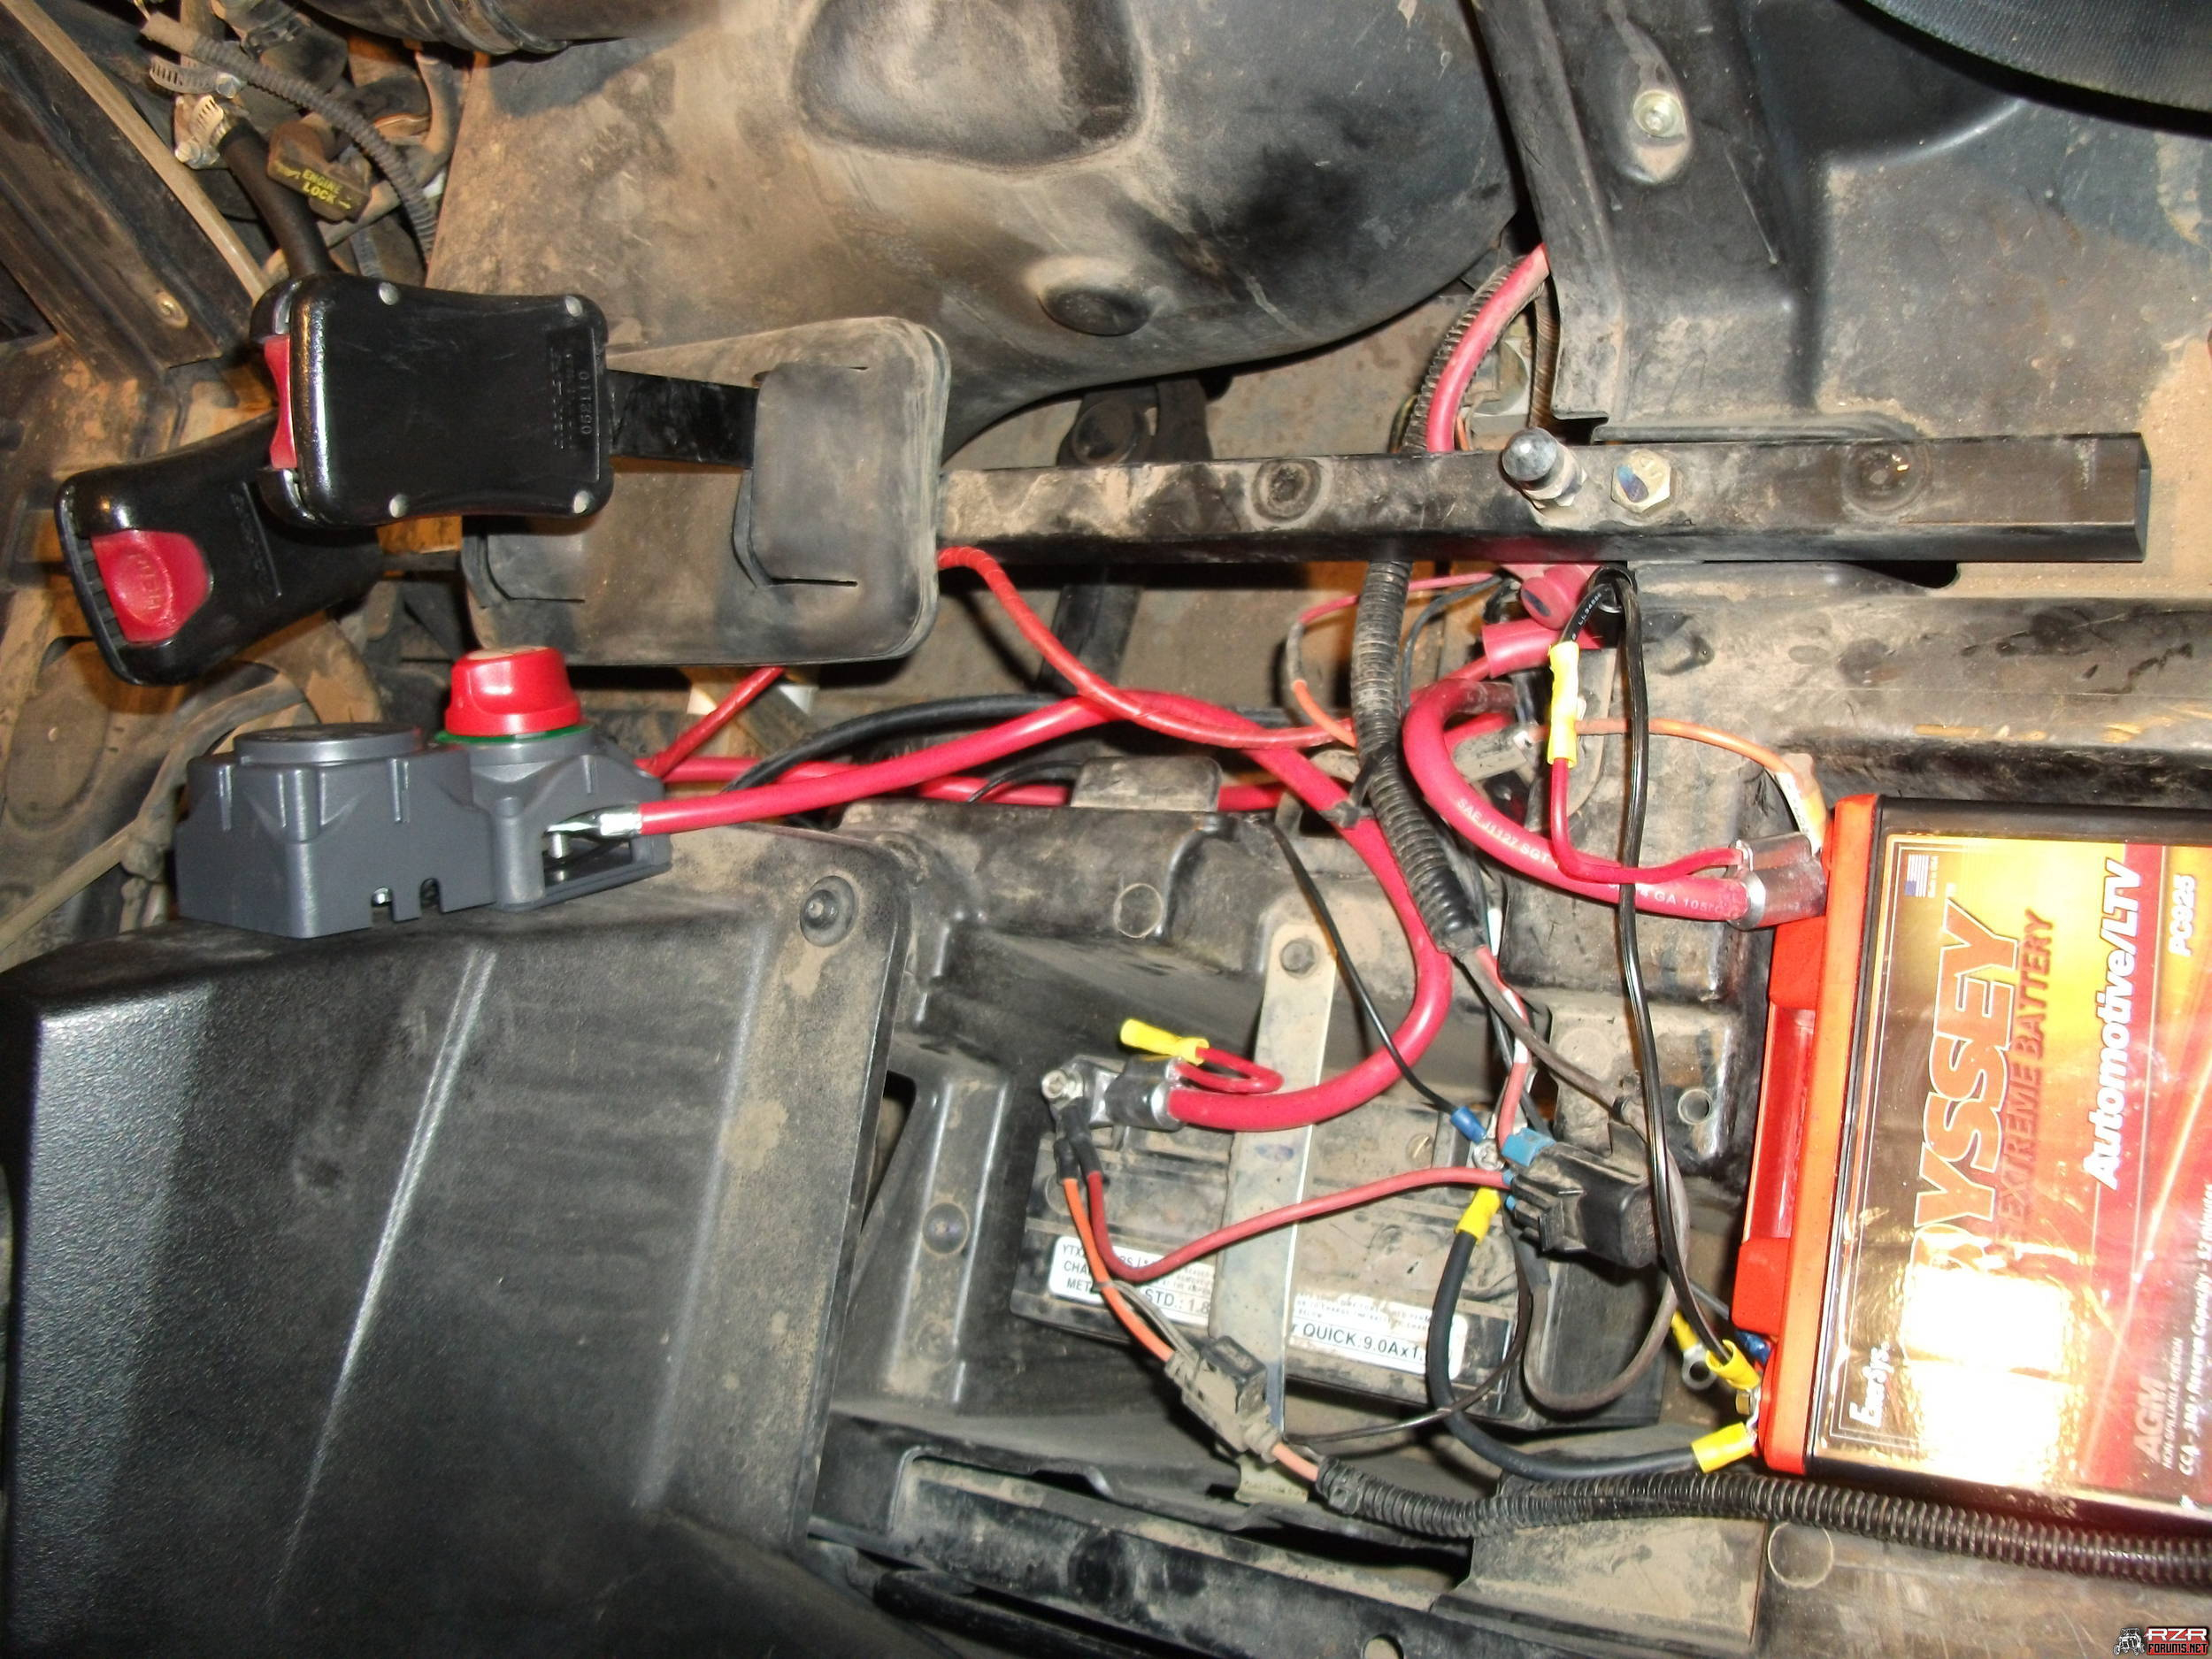 Polaris Ranger 500 Fuse Box | Wiring Library - Mercury Outboard Ignition Switch Wiring Diagram